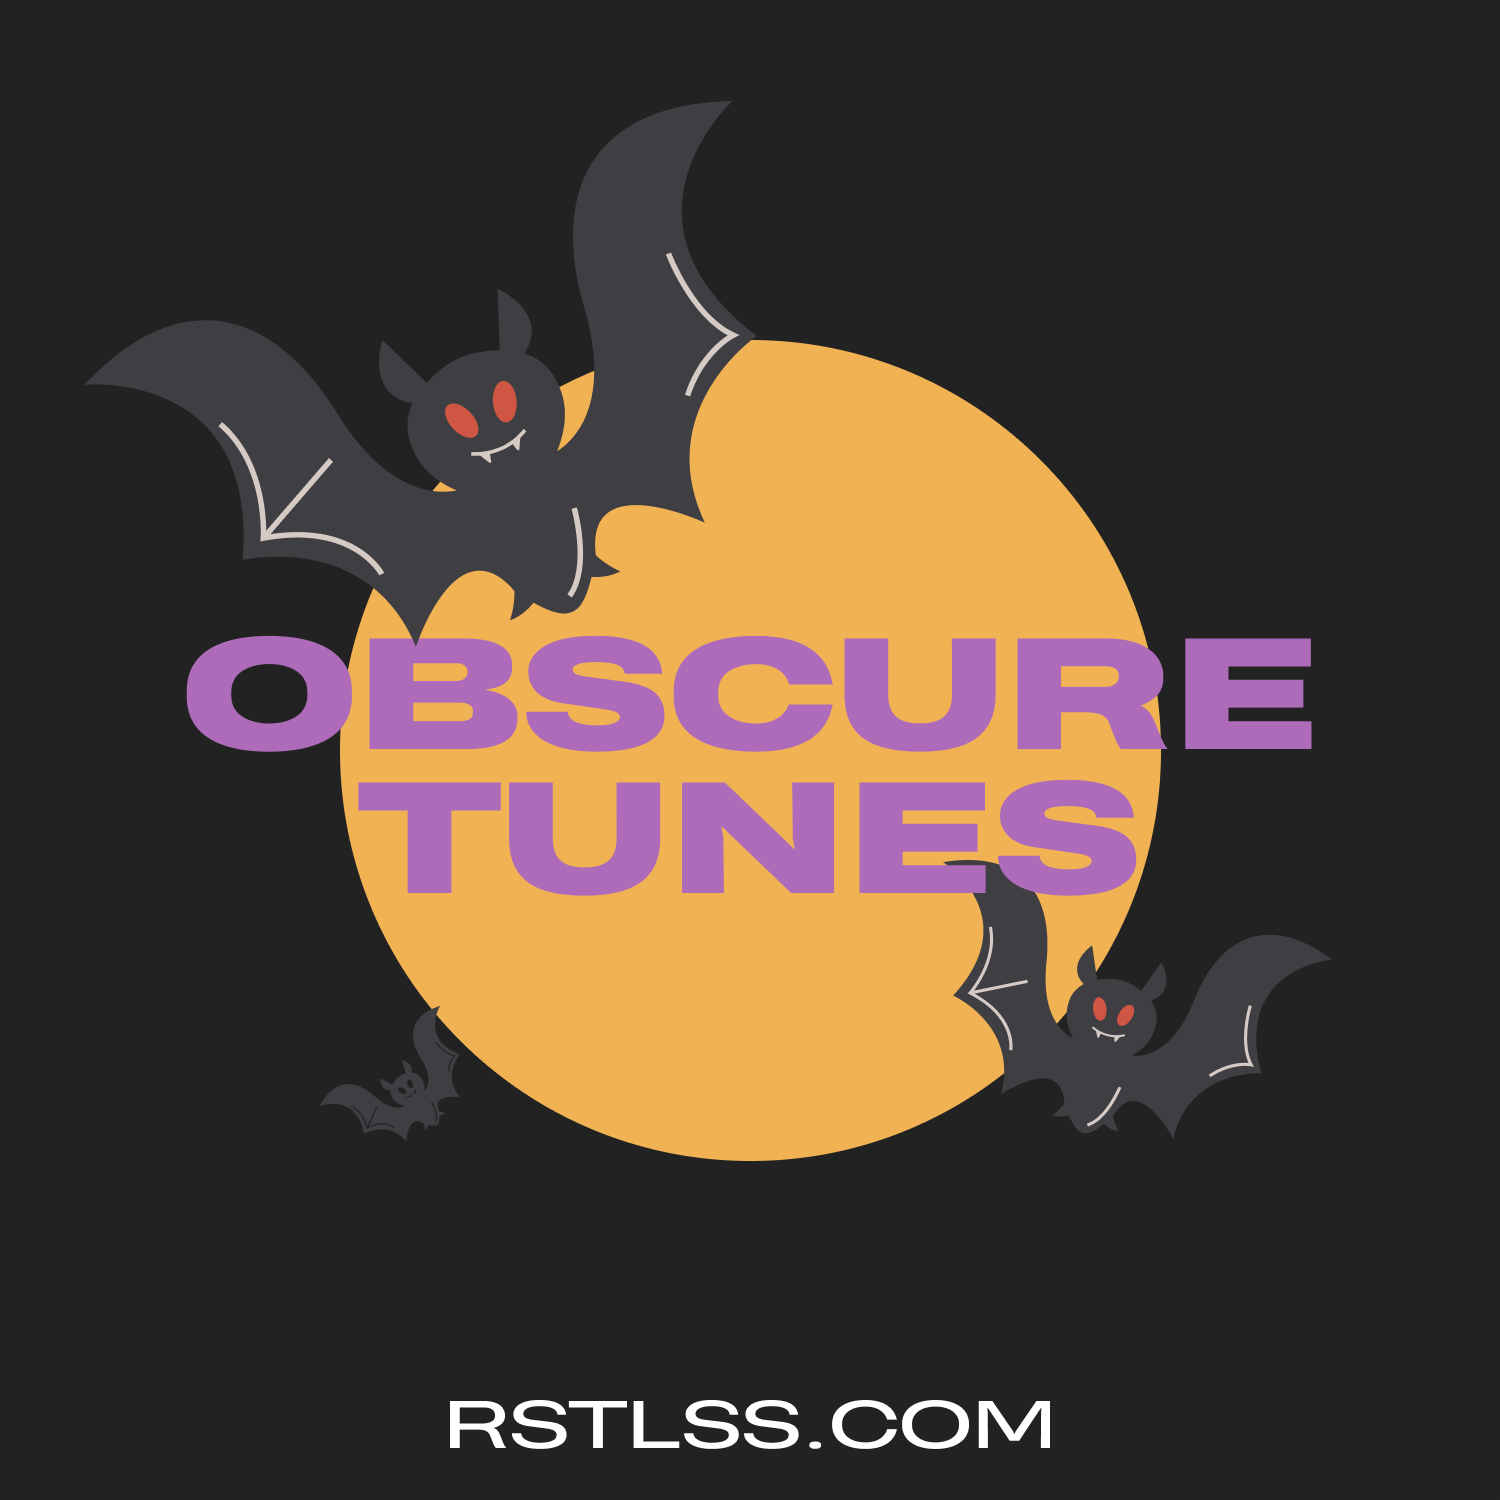 OBSCURE TUNES #2 – Voodoo Bandits, Use The Sun, Television Screams, No Parents…